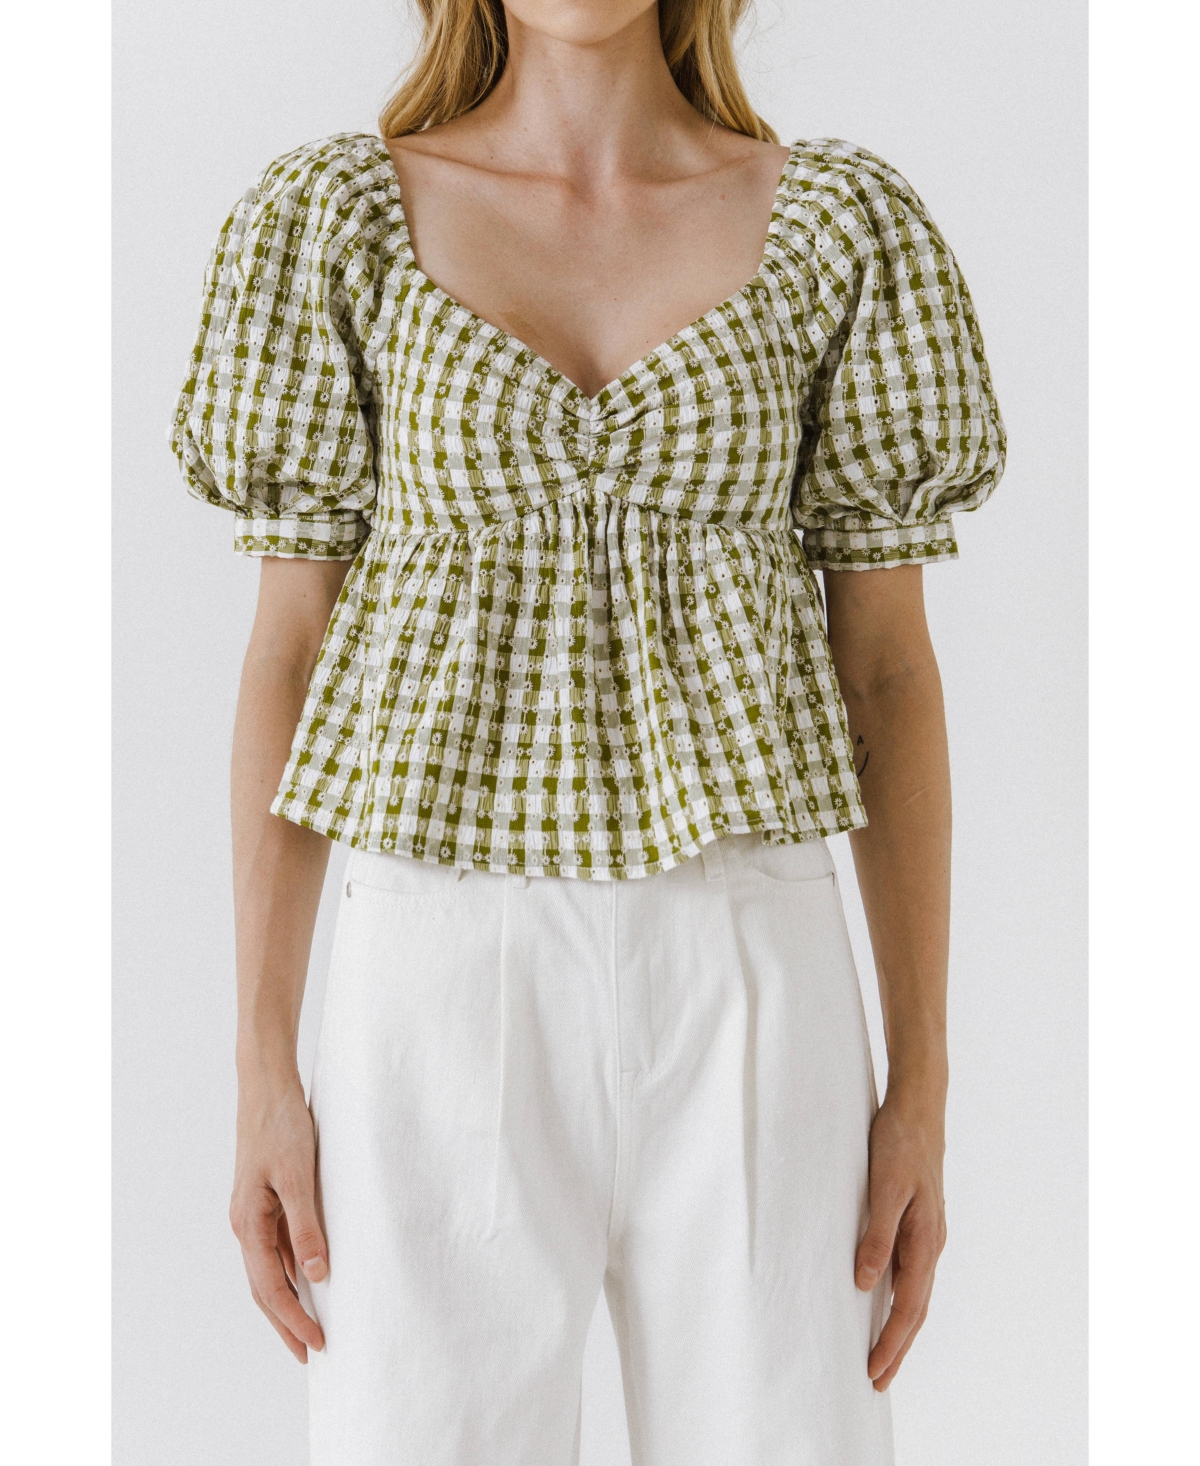 Women's Gingham Check Top with Embroidery - Olive